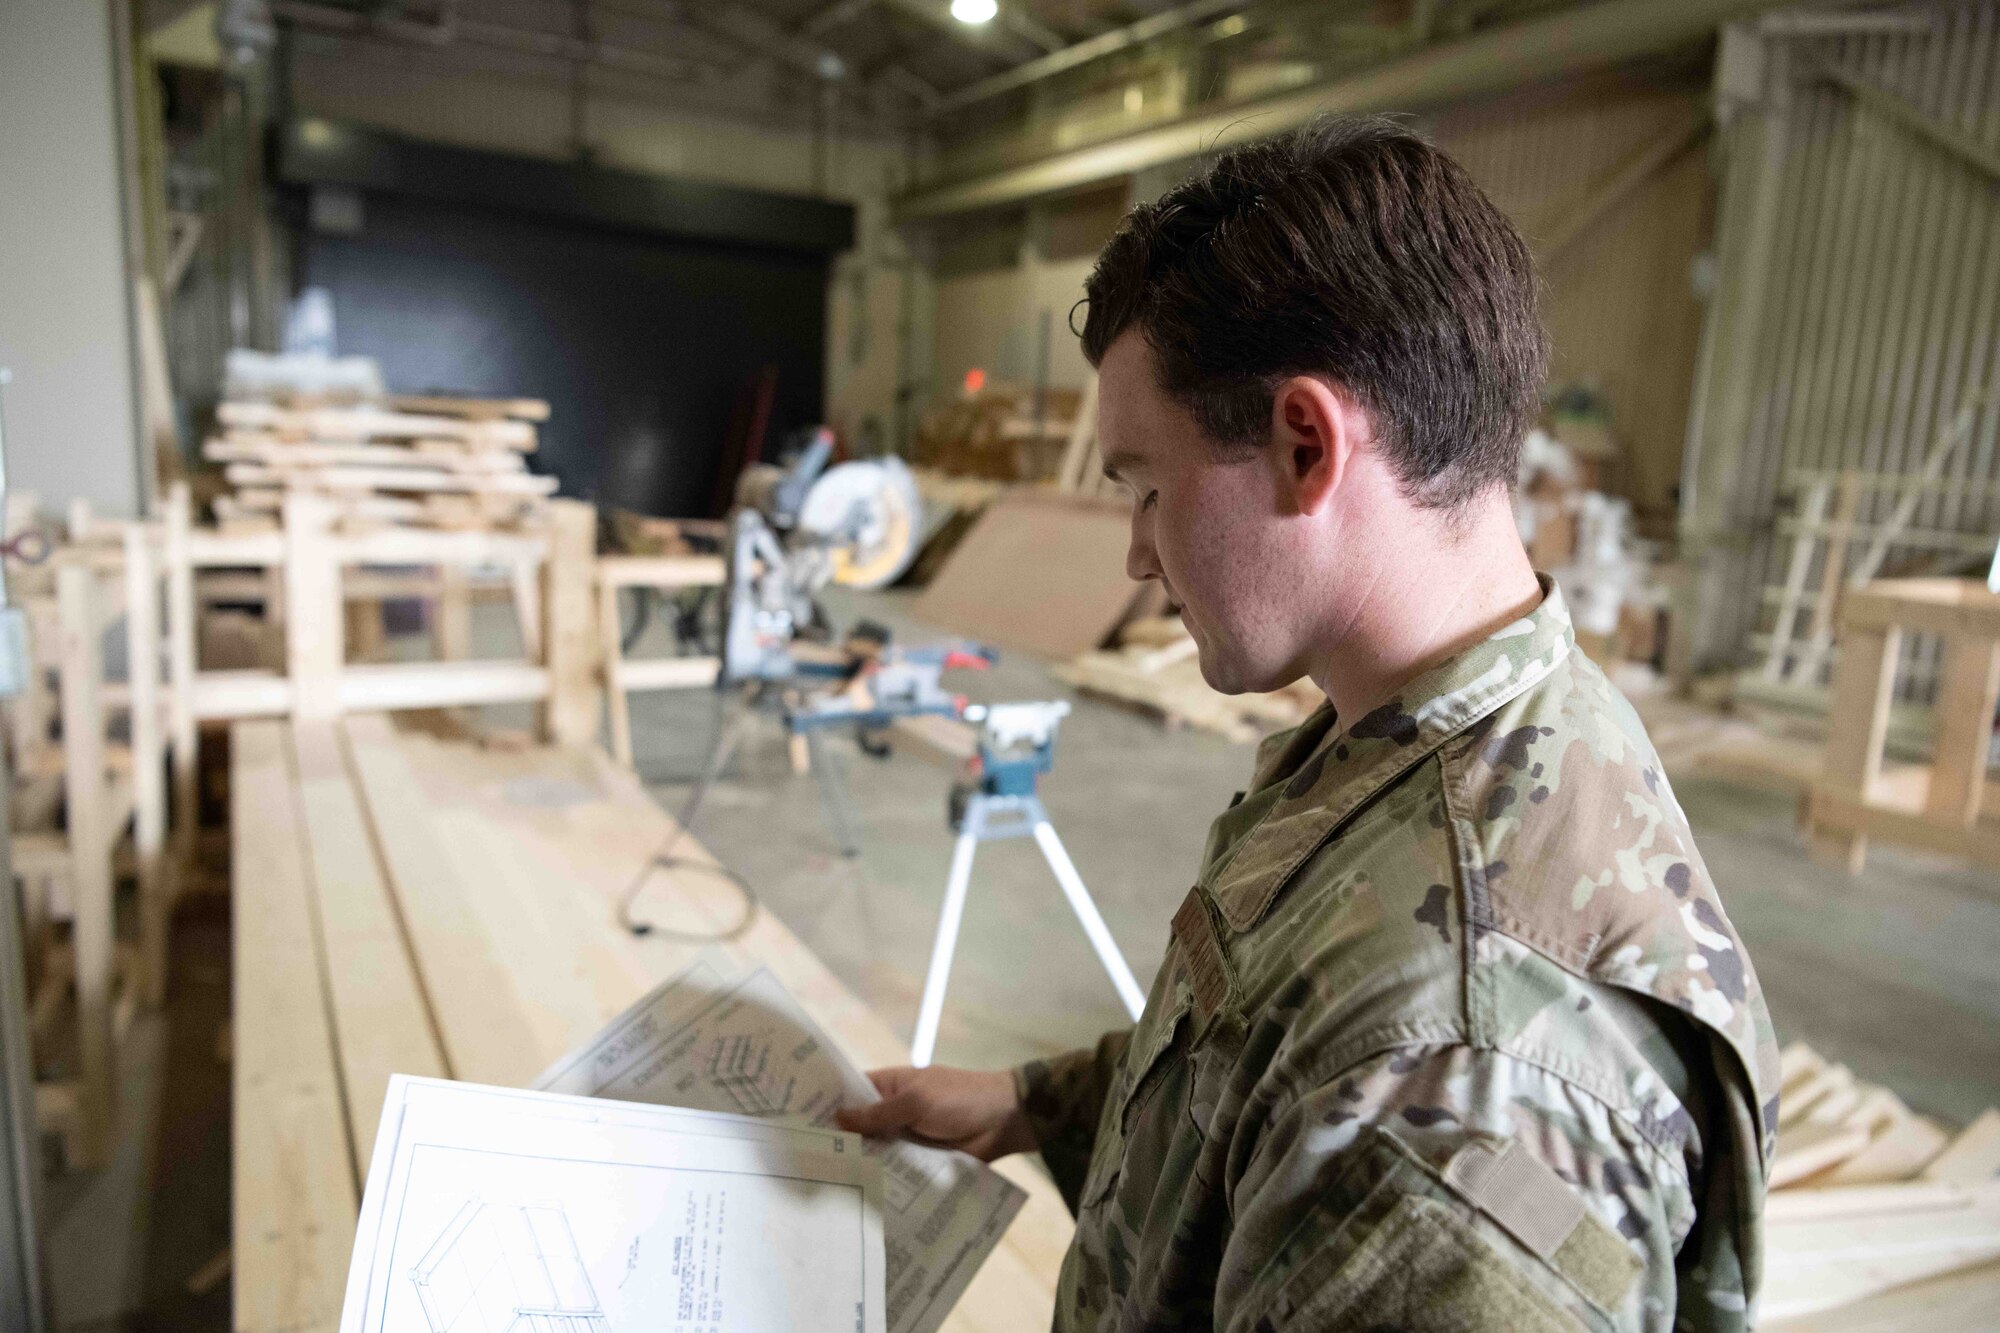 A military member looks over the blocks and brace instructions.